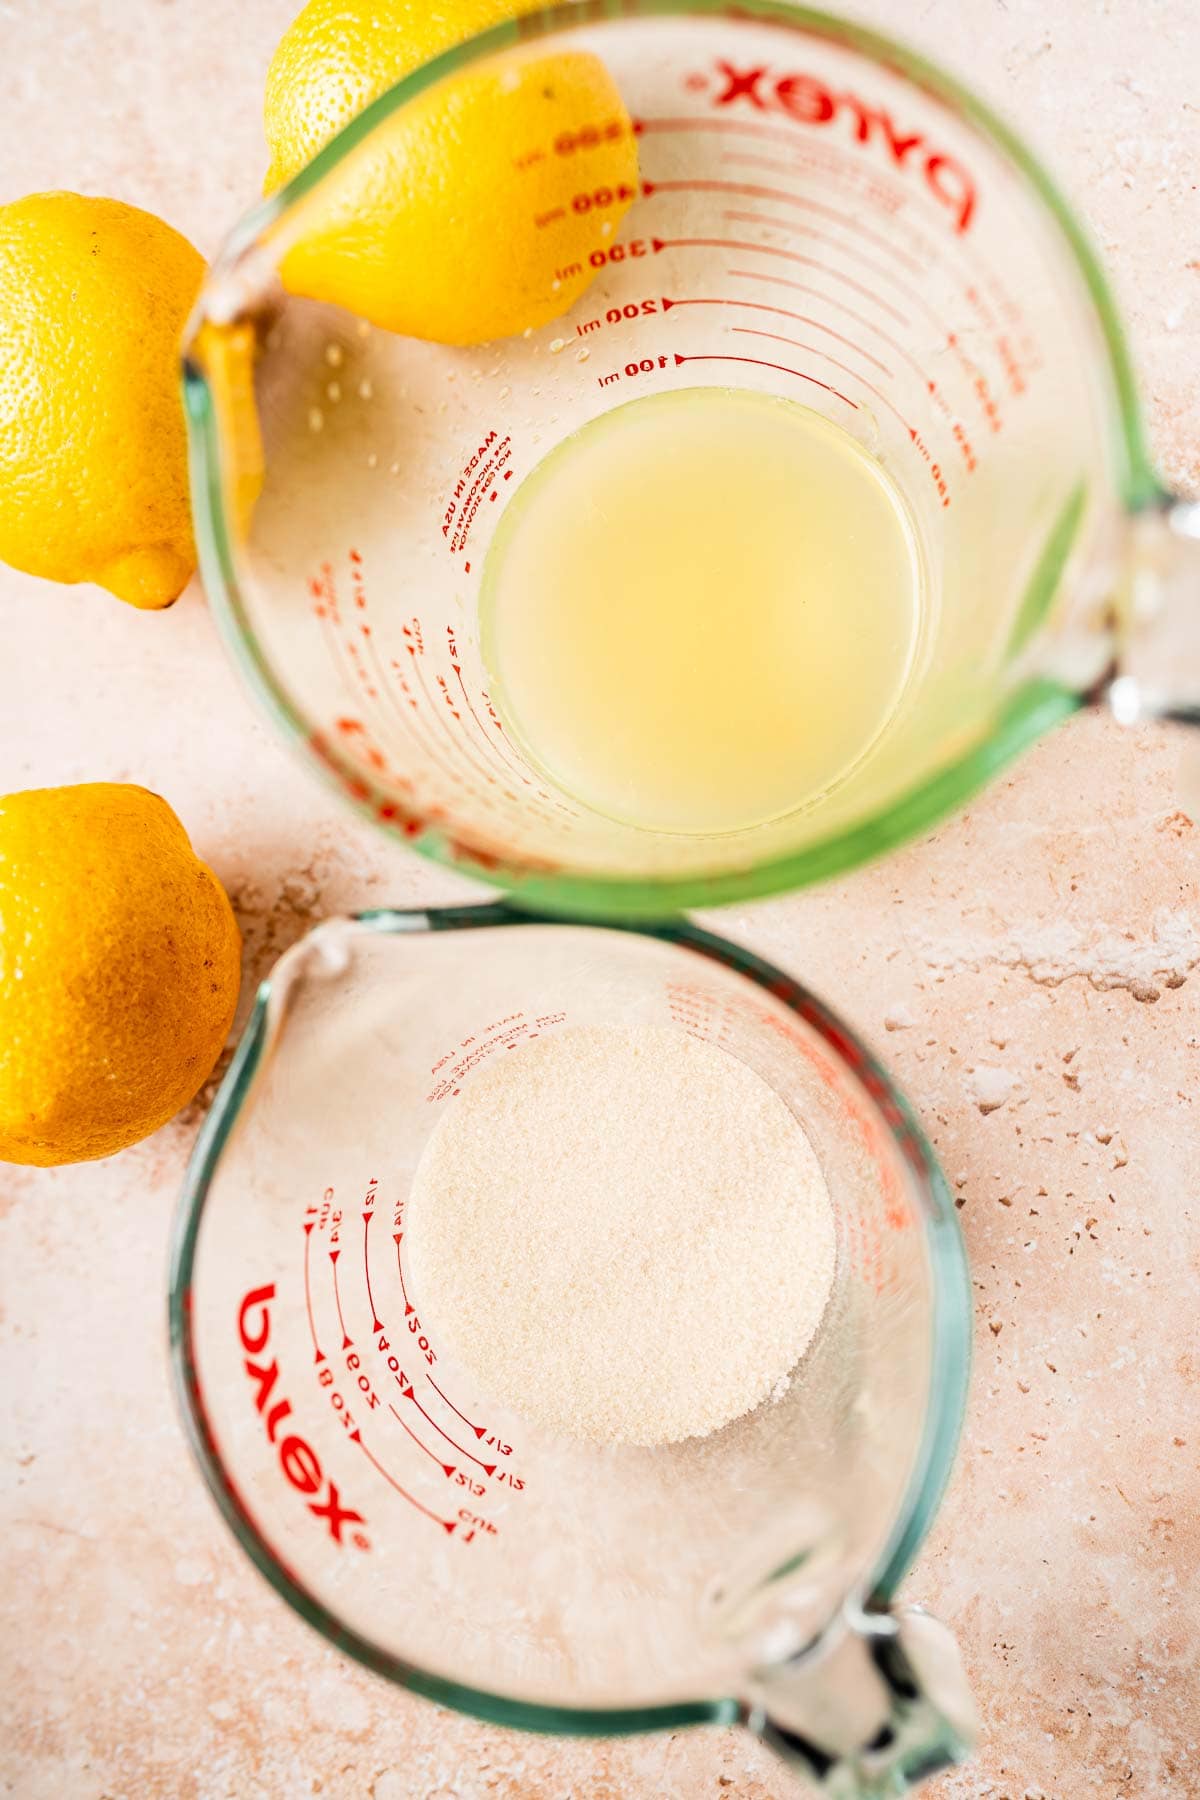 Top view of two pyrex measuring cups filled with sugar and lemon juice.